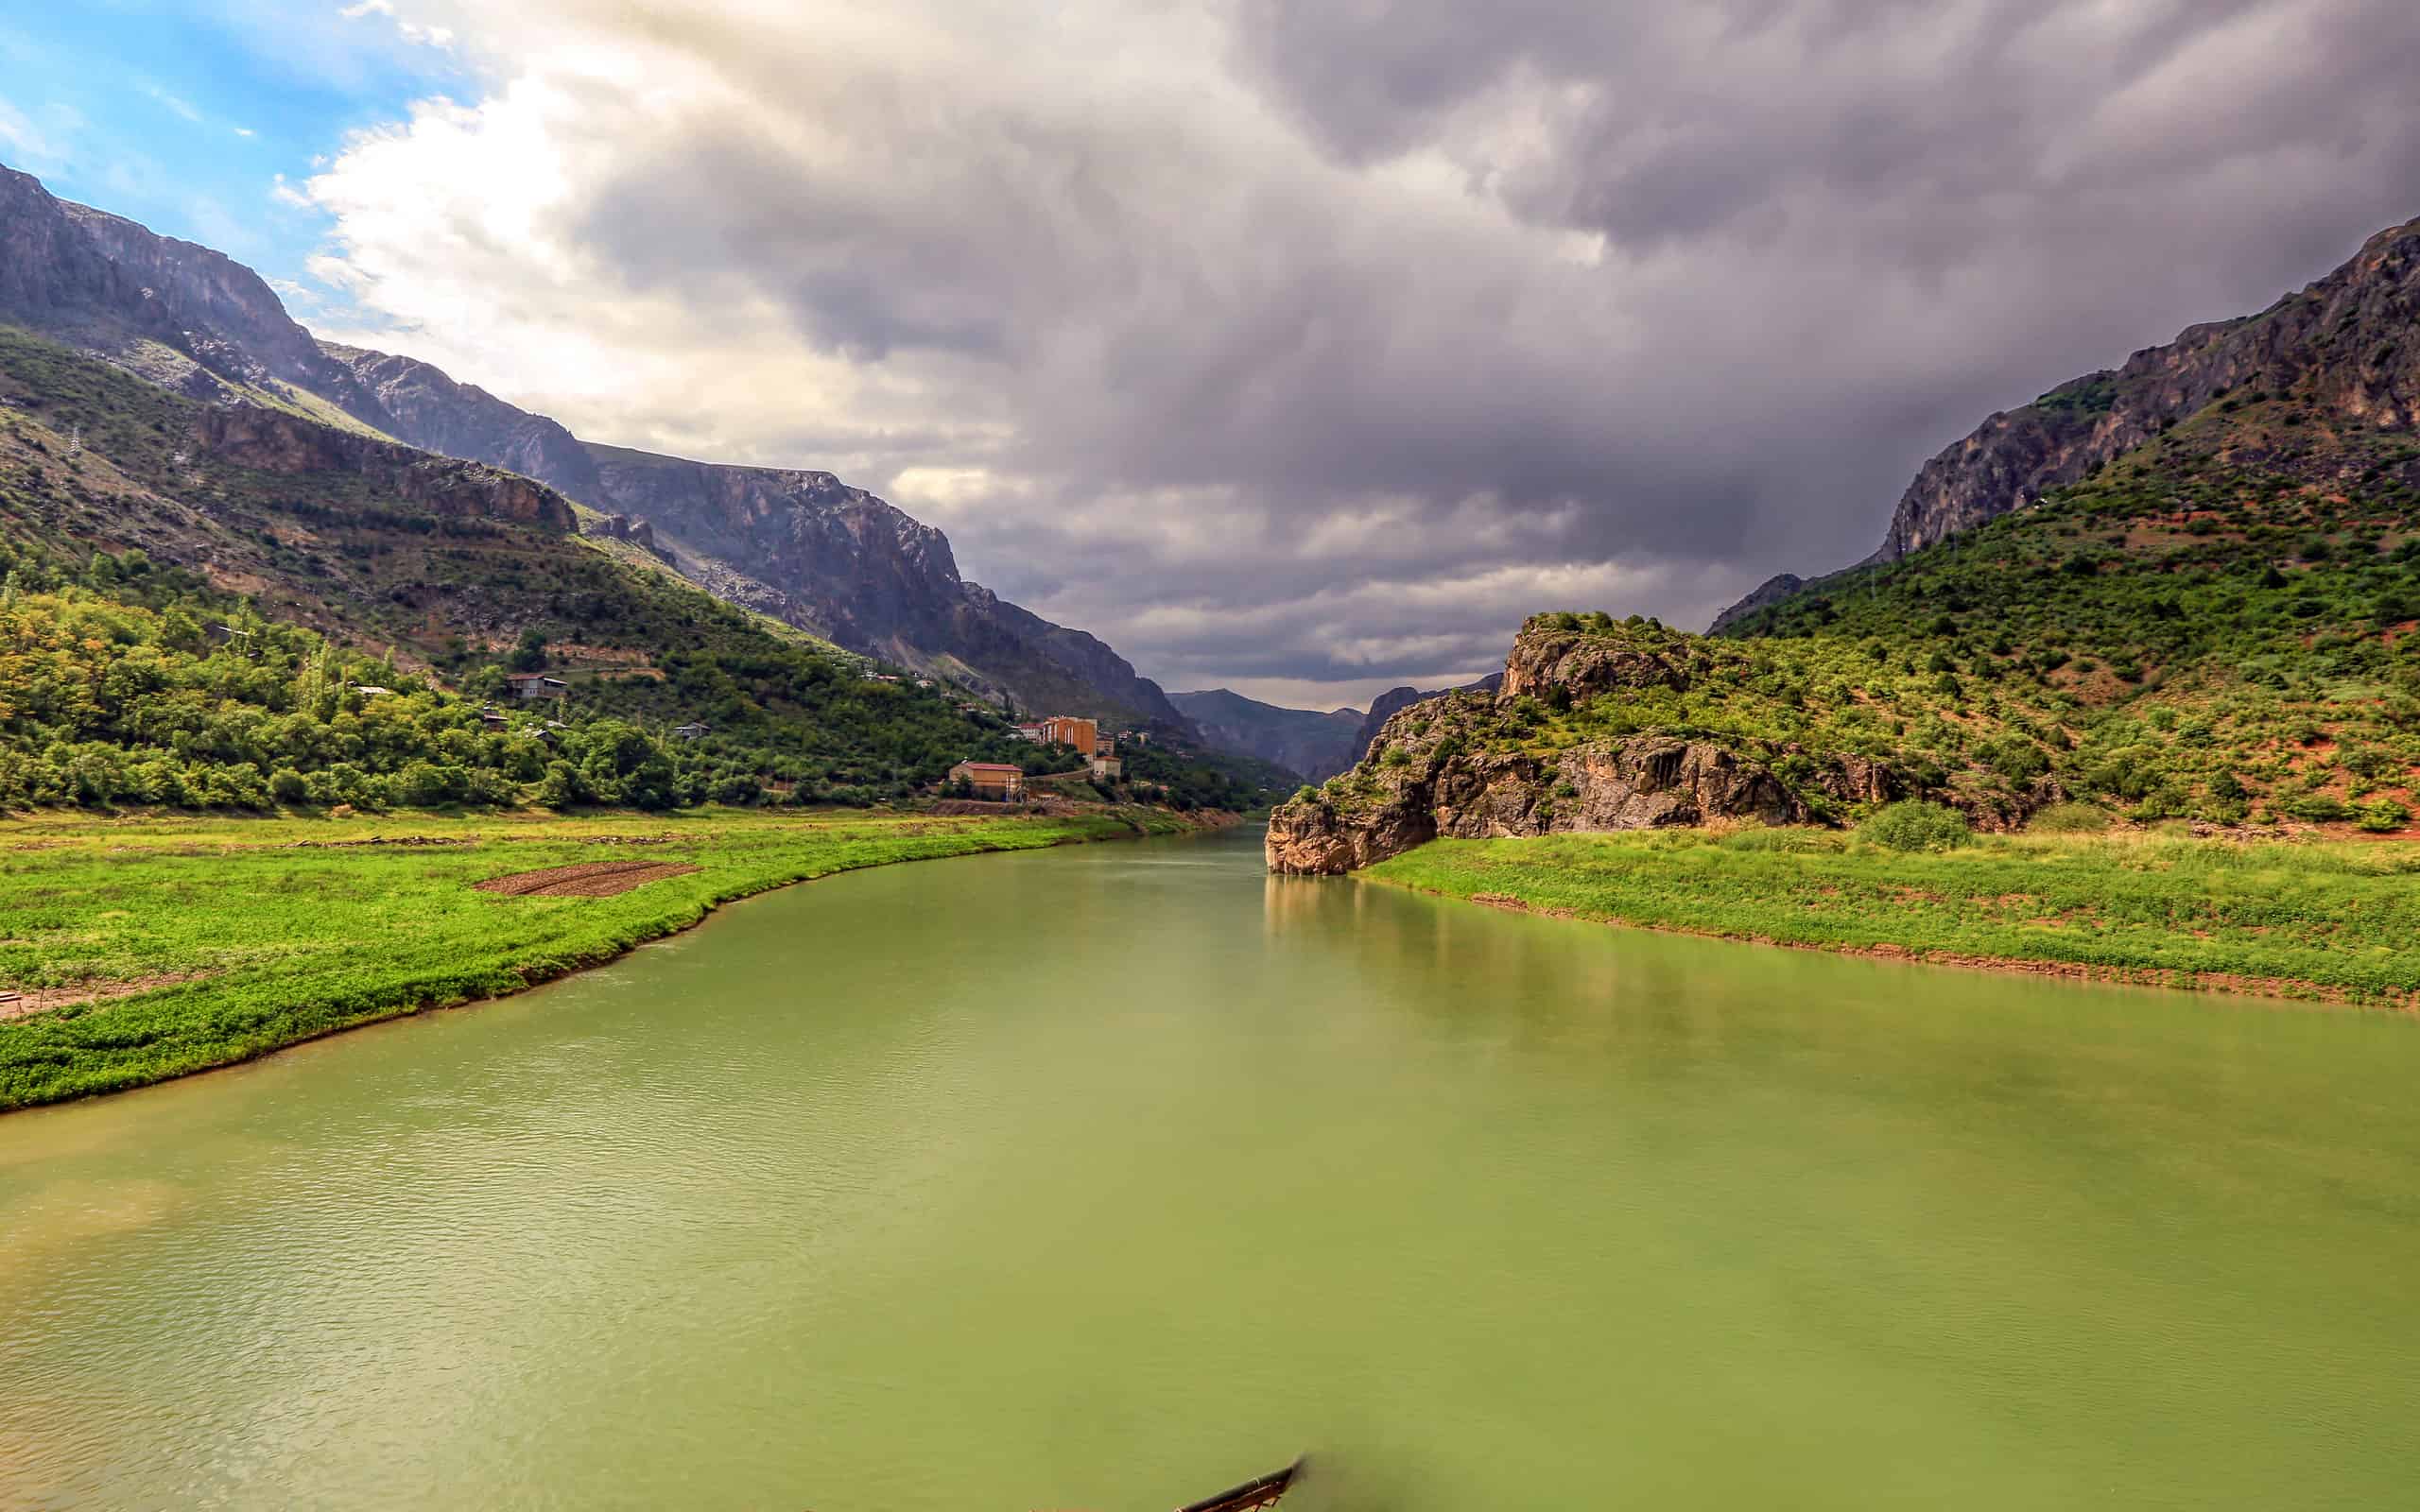 Landscape of the Euphrates River in Kemaliye, Erzincan, Turkey. The Euphrates flows through Syria and Iraq to join the Tigris in the Shatt al-Arab, which empties into the Persian Gulf.